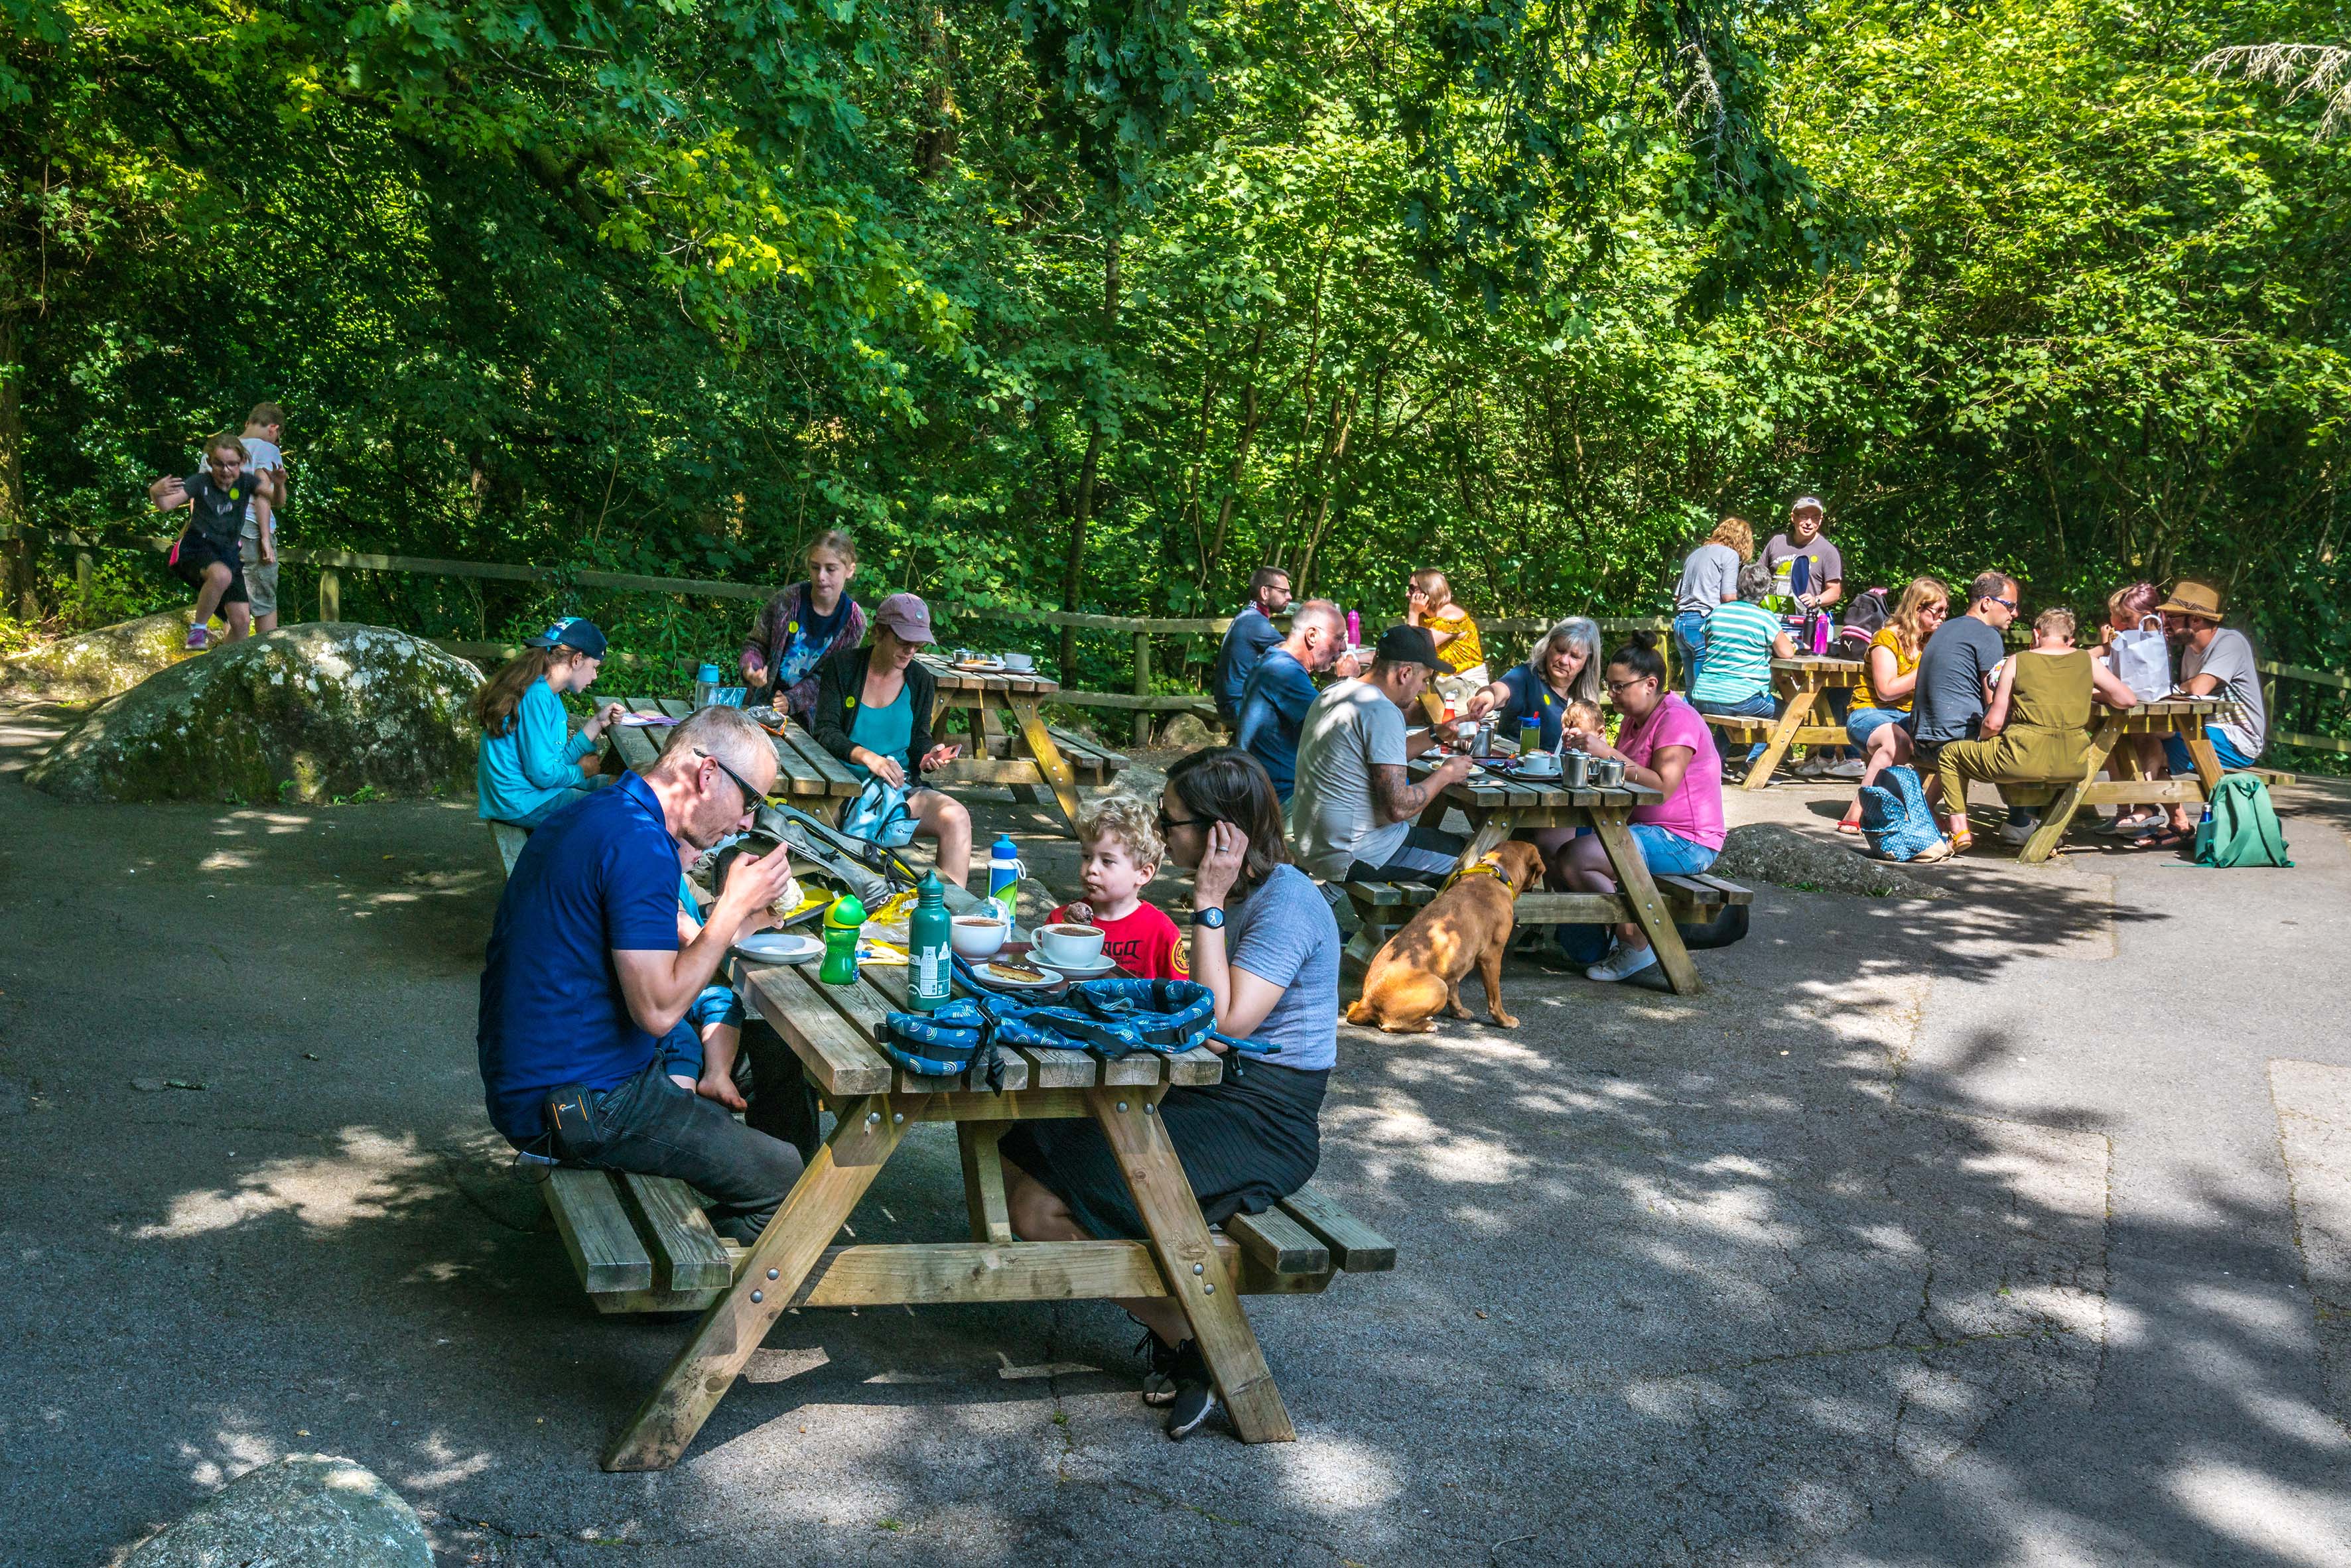 families enjoying meal on picnic tables